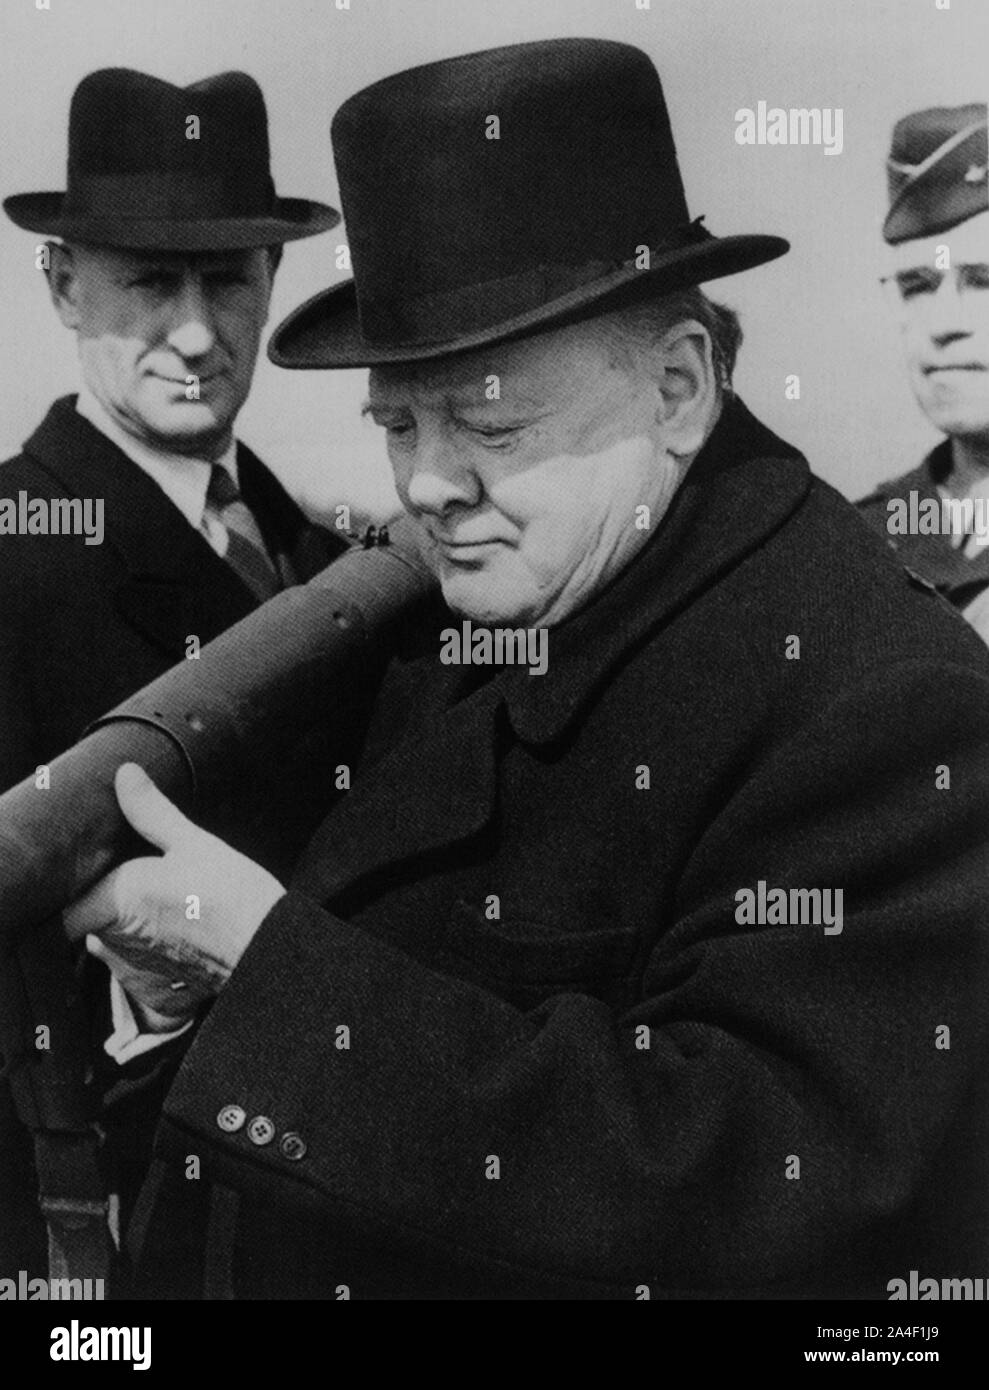 Churchill inspecting a bazooka anti-tank weapon. Churchill's protection officer, Inspector Thompson and General Omar Bradley look on. March 1944. Stock Photo